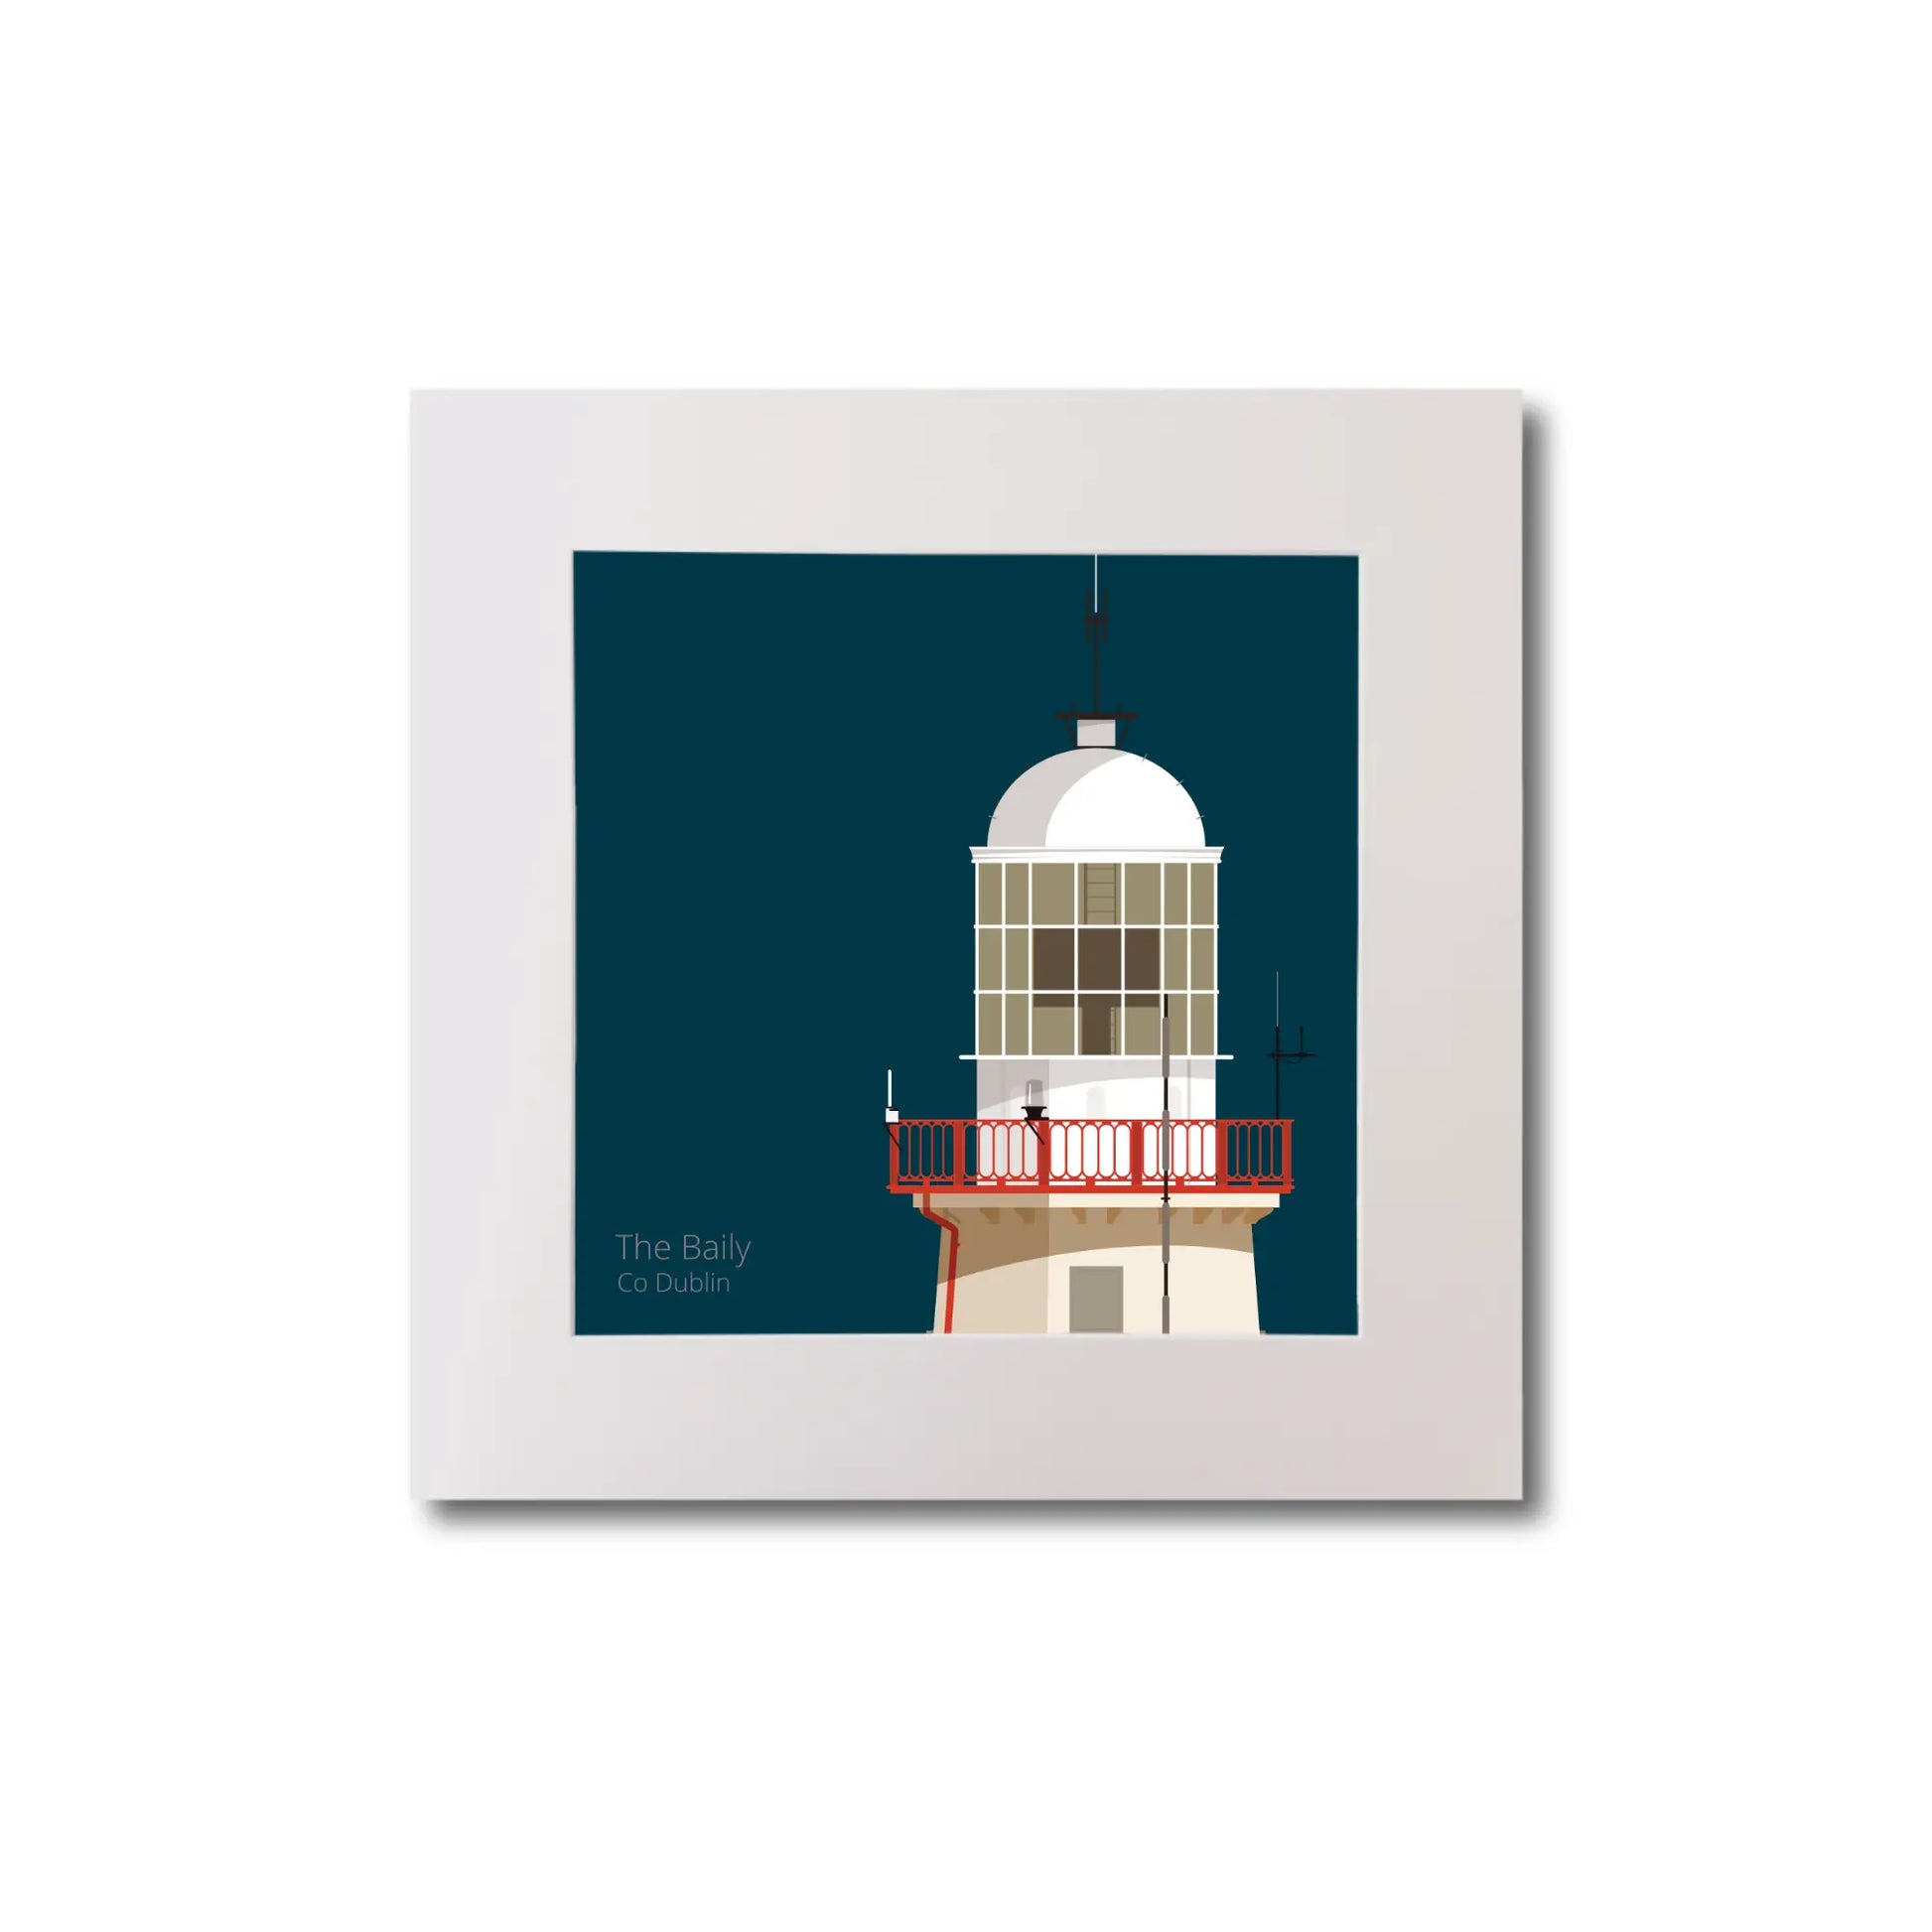 Illustration of The Baily lighthouse on a midnight blue background, mounted and measuring 20x20cm.